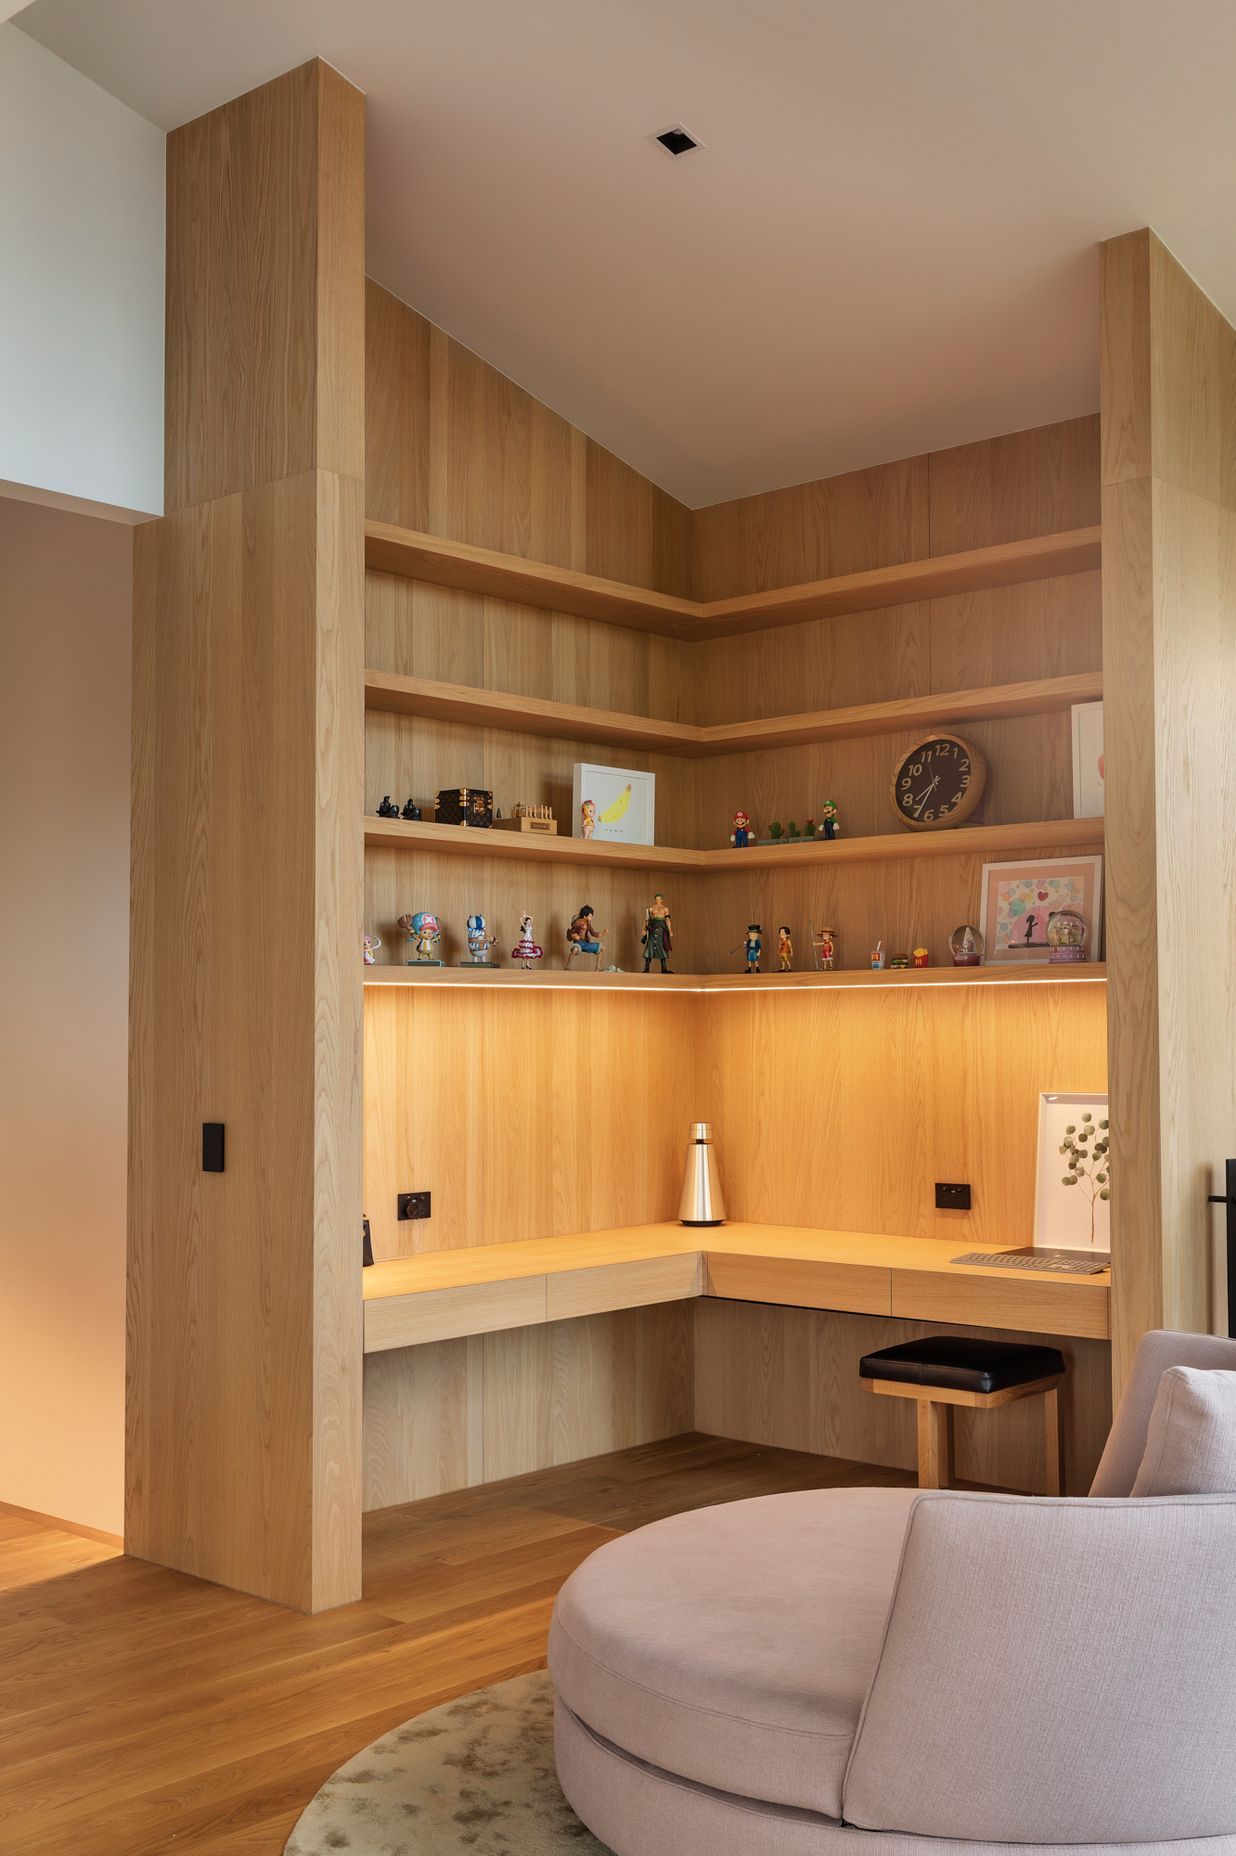 The study features built-in oak cabinetry with hidden drawers in the benchtop.